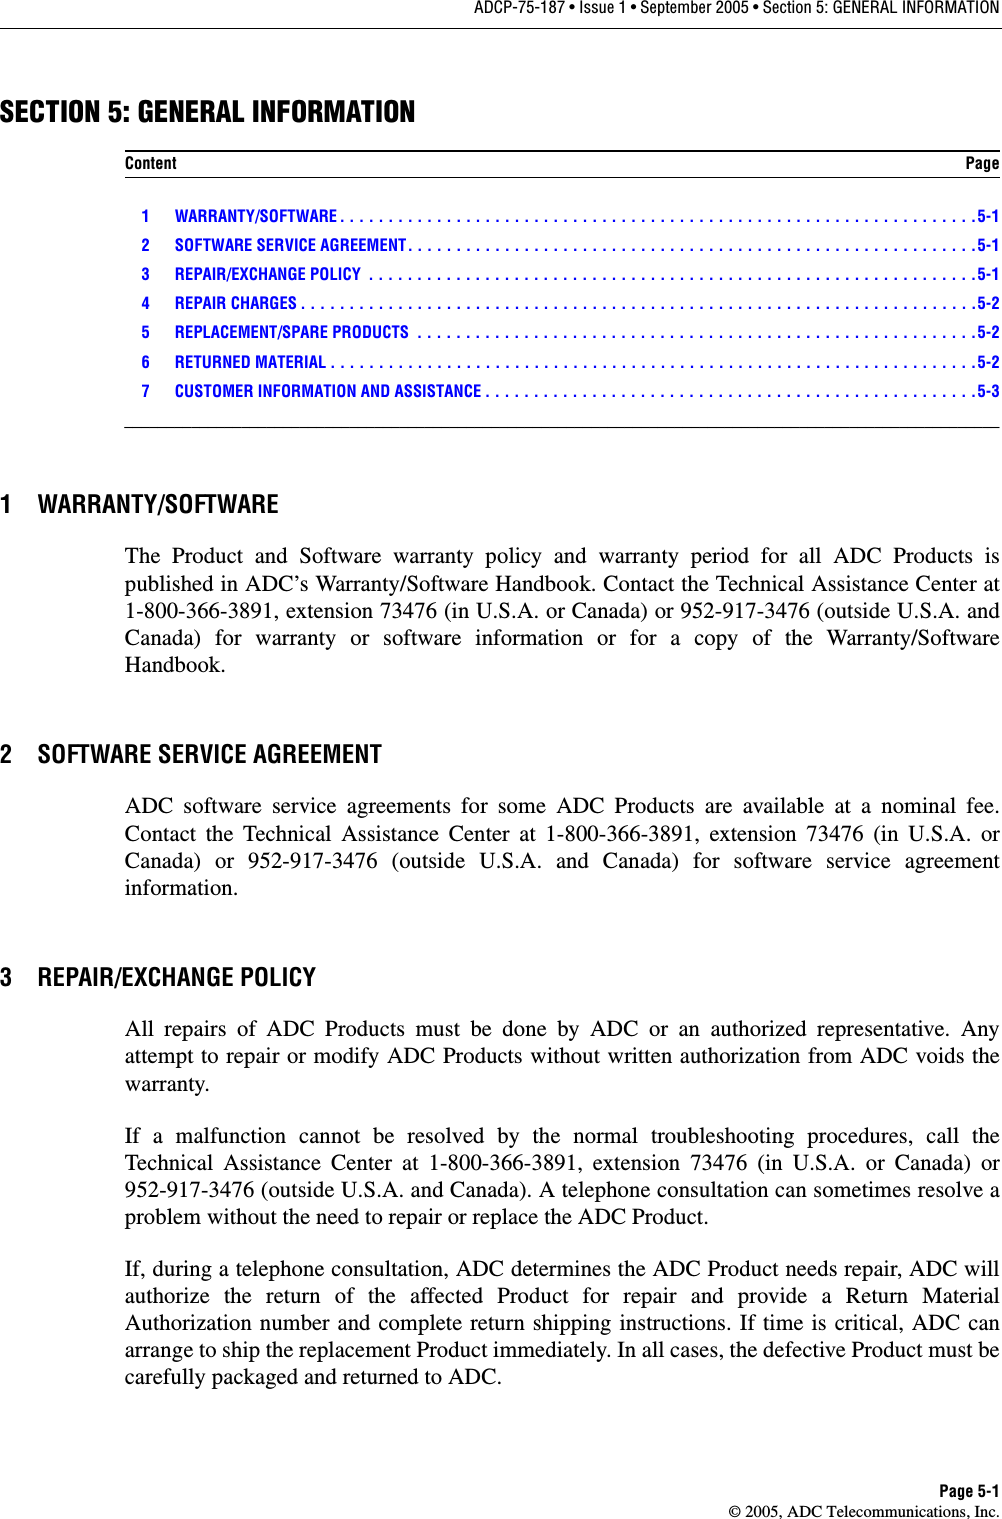 ADCP-75-187 • Issue 1 • September 2005 • Section 5: GENERAL INFORMATIONPage 5-1© 2005, ADC Telecommunications, Inc.SECTION 5: GENERAL INFORMATION1 WARRANTY/SOFTWARE . . . . . . . . . . . . . . . . . . . . . . . . . . . . . . . . . . . . . . . . . . . . . . . . . . . . . . . . . . . . . . . . . .5-12 SOFTWARE SERVICE AGREEMENT. . . . . . . . . . . . . . . . . . . . . . . . . . . . . . . . . . . . . . . . . . . . . . . . . . . . . . . . . . .5-13 REPAIR/EXCHANGE POLICY  . . . . . . . . . . . . . . . . . . . . . . . . . . . . . . . . . . . . . . . . . . . . . . . . . . . . . . . . . . . . . . .5-14 REPAIR CHARGES . . . . . . . . . . . . . . . . . . . . . . . . . . . . . . . . . . . . . . . . . . . . . . . . . . . . . . . . . . . . . . . . . . . . . .5-25 REPLACEMENT/SPARE PRODUCTS  . . . . . . . . . . . . . . . . . . . . . . . . . . . . . . . . . . . . . . . . . . . . . . . . . . . . . . . . . .5-26 RETURNED MATERIAL . . . . . . . . . . . . . . . . . . . . . . . . . . . . . . . . . . . . . . . . . . . . . . . . . . . . . . . . . . . . . . . . . . .5-27 CUSTOMER INFORMATION AND ASSISTANCE . . . . . . . . . . . . . . . . . . . . . . . . . . . . . . . . . . . . . . . . . . . . . . . . . . .5-3_________________________________________________________________________________________________________1 WARRANTY/SOFTWAREThe Product and Software warranty policy and warranty period for all ADC Products ispublished in ADC’s Warranty/Software Handbook. Contact the Technical Assistance Center at1-800-366-3891, extension 73476 (in U.S.A. or Canada) or 952-917-3476 (outside U.S.A. andCanada) for warranty or software information or for a copy of the Warranty/SoftwareHandbook.2 SOFTWARE SERVICE AGREEMENTADC software service agreements for some ADC Products are available at a nominal fee.Contact the Technical Assistance Center at 1-800-366-3891, extension 73476 (in U.S.A. orCanada) or 952-917-3476 (outside U.S.A. and Canada) for software service agreementinformation.3 REPAIR/EXCHANGE POLICYAll repairs of ADC Products must be done by ADC or an authorized representative. Anyattempt to repair or modify ADC Products without written authorization from ADC voids thewarranty.If a malfunction cannot be resolved by the normal troubleshooting procedures, call theTechnical Assistance Center at 1-800-366-3891, extension 73476 (in U.S.A. or Canada) or952-917-3476 (outside U.S.A. and Canada). A telephone consultation can sometimes resolve aproblem without the need to repair or replace the ADC Product.If, during a telephone consultation, ADC determines the ADC Product needs repair, ADC willauthorize the return of the affected Product for repair and provide a Return MaterialAuthorization number and complete return shipping instructions. If time is critical, ADC canarrange to ship the replacement Product immediately. In all cases, the defective Product must becarefully packaged and returned to ADC.Content Page